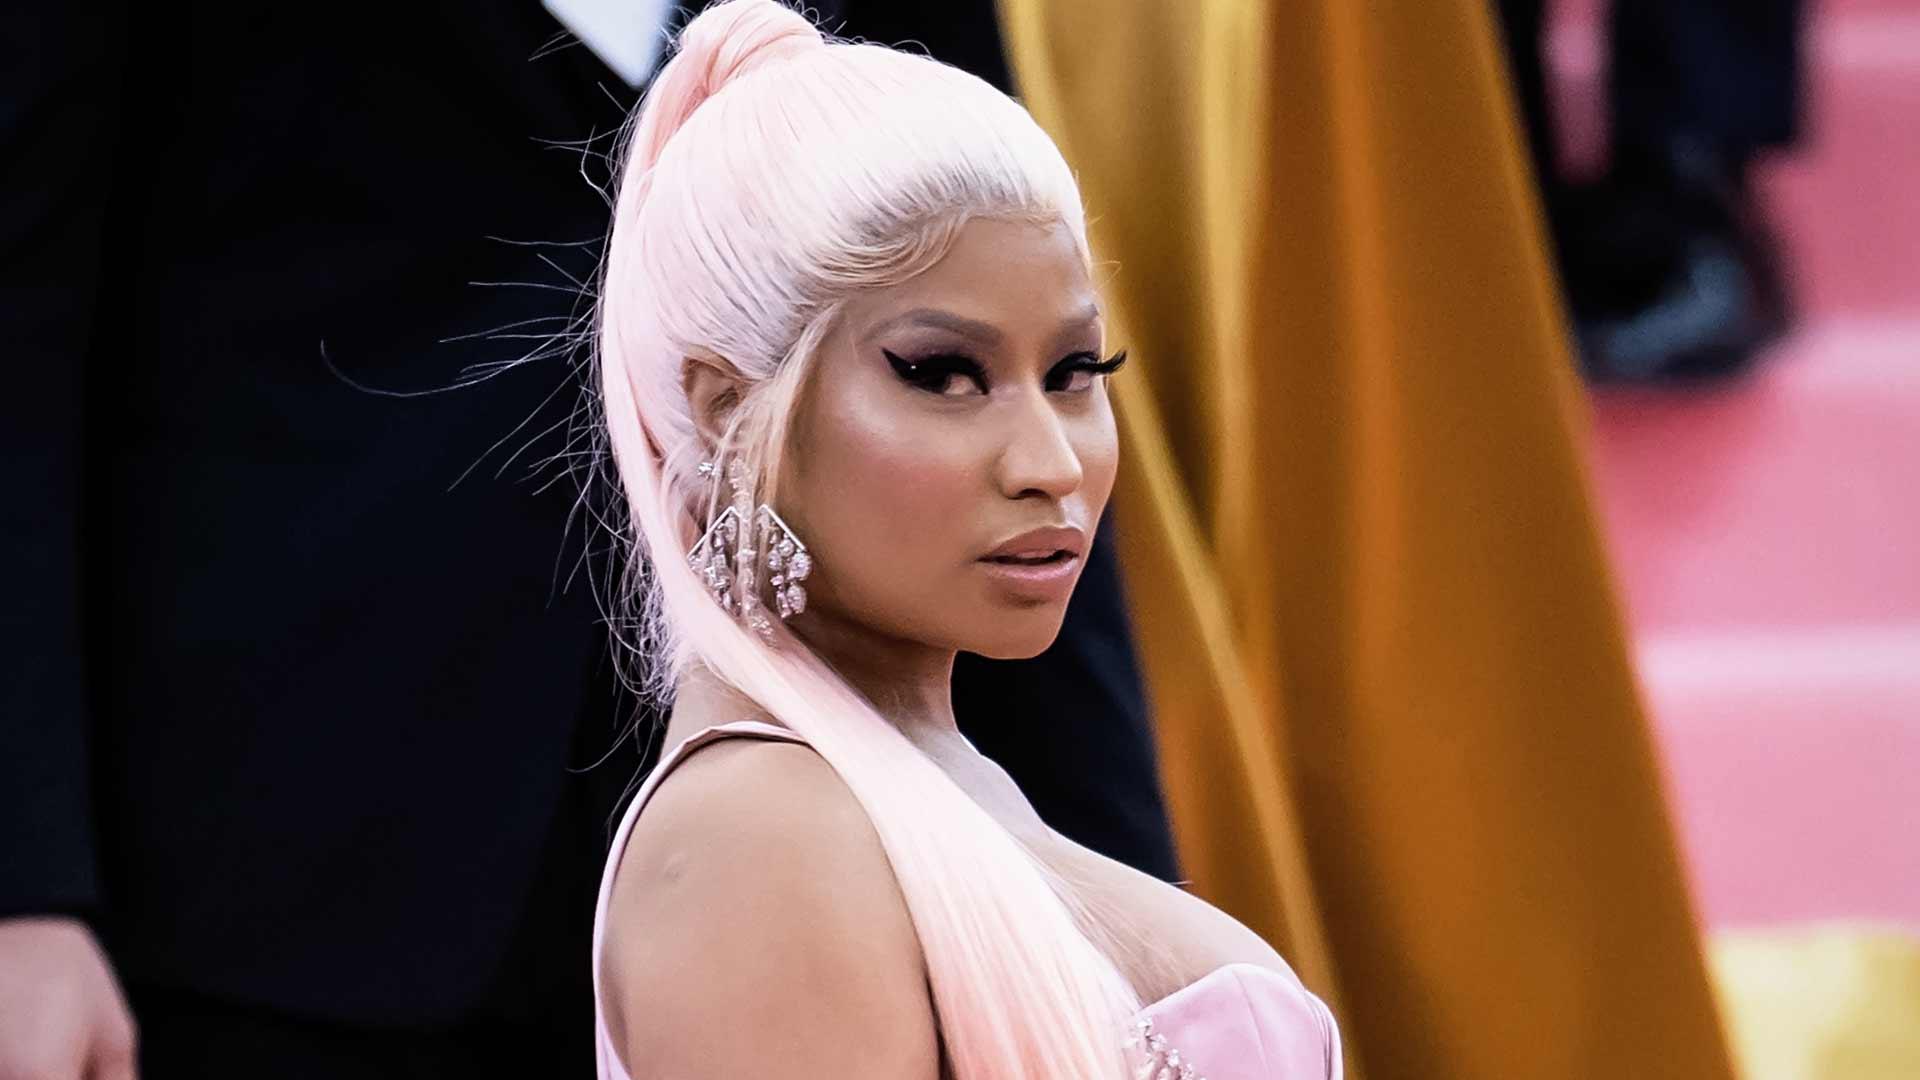 Writer Claims Negative Nicki Minaj Tweet Lead to Rapper Privately Threatening Her and Cost Her A Job